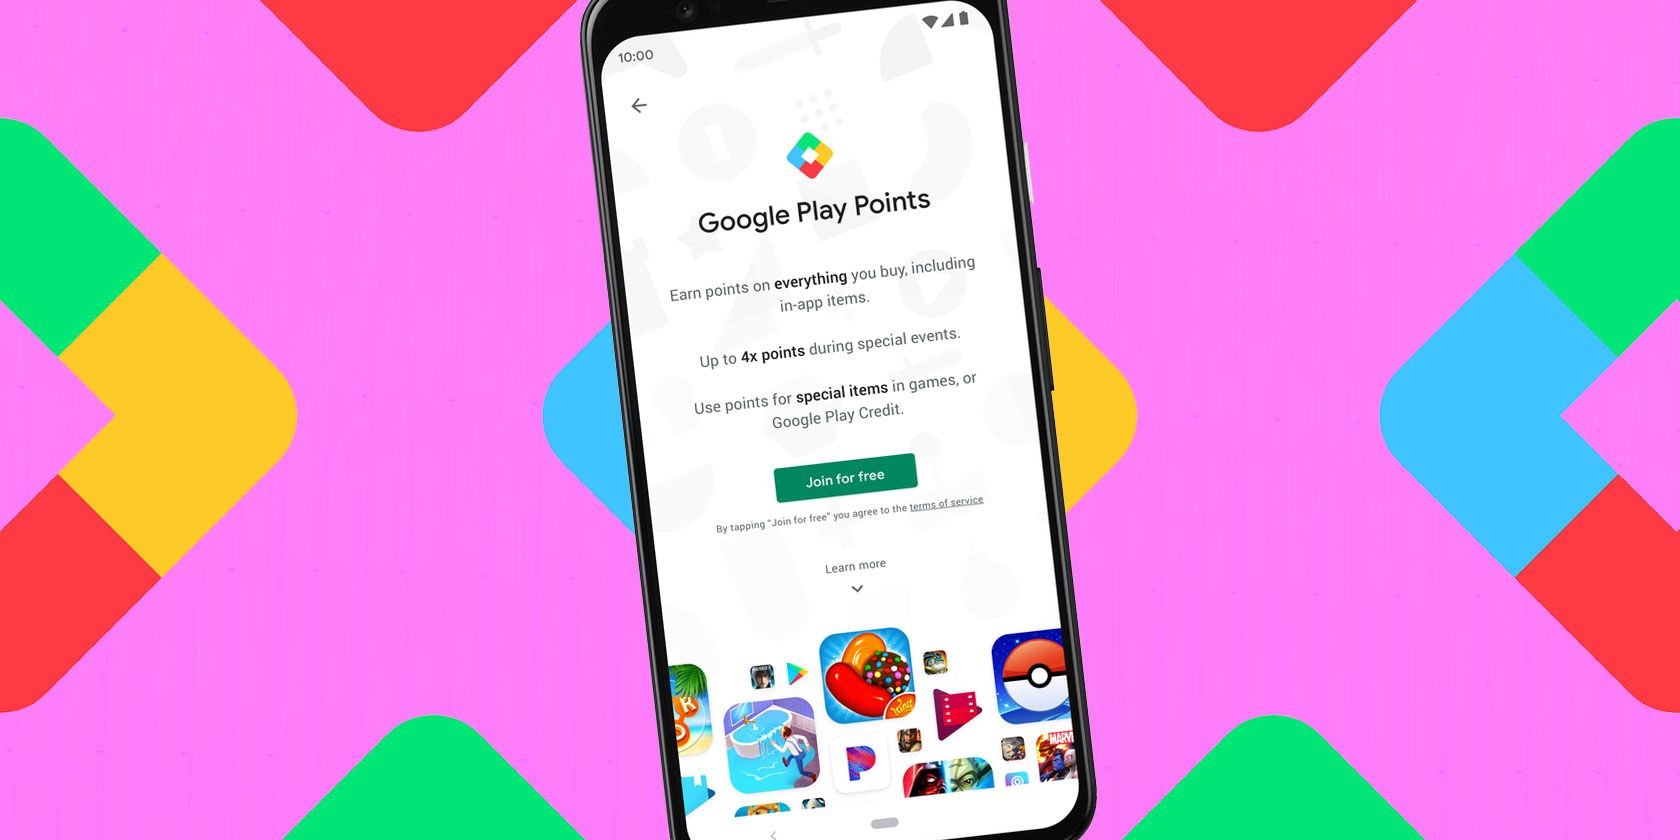 What Are Google Play Points and How Can You Use Them?